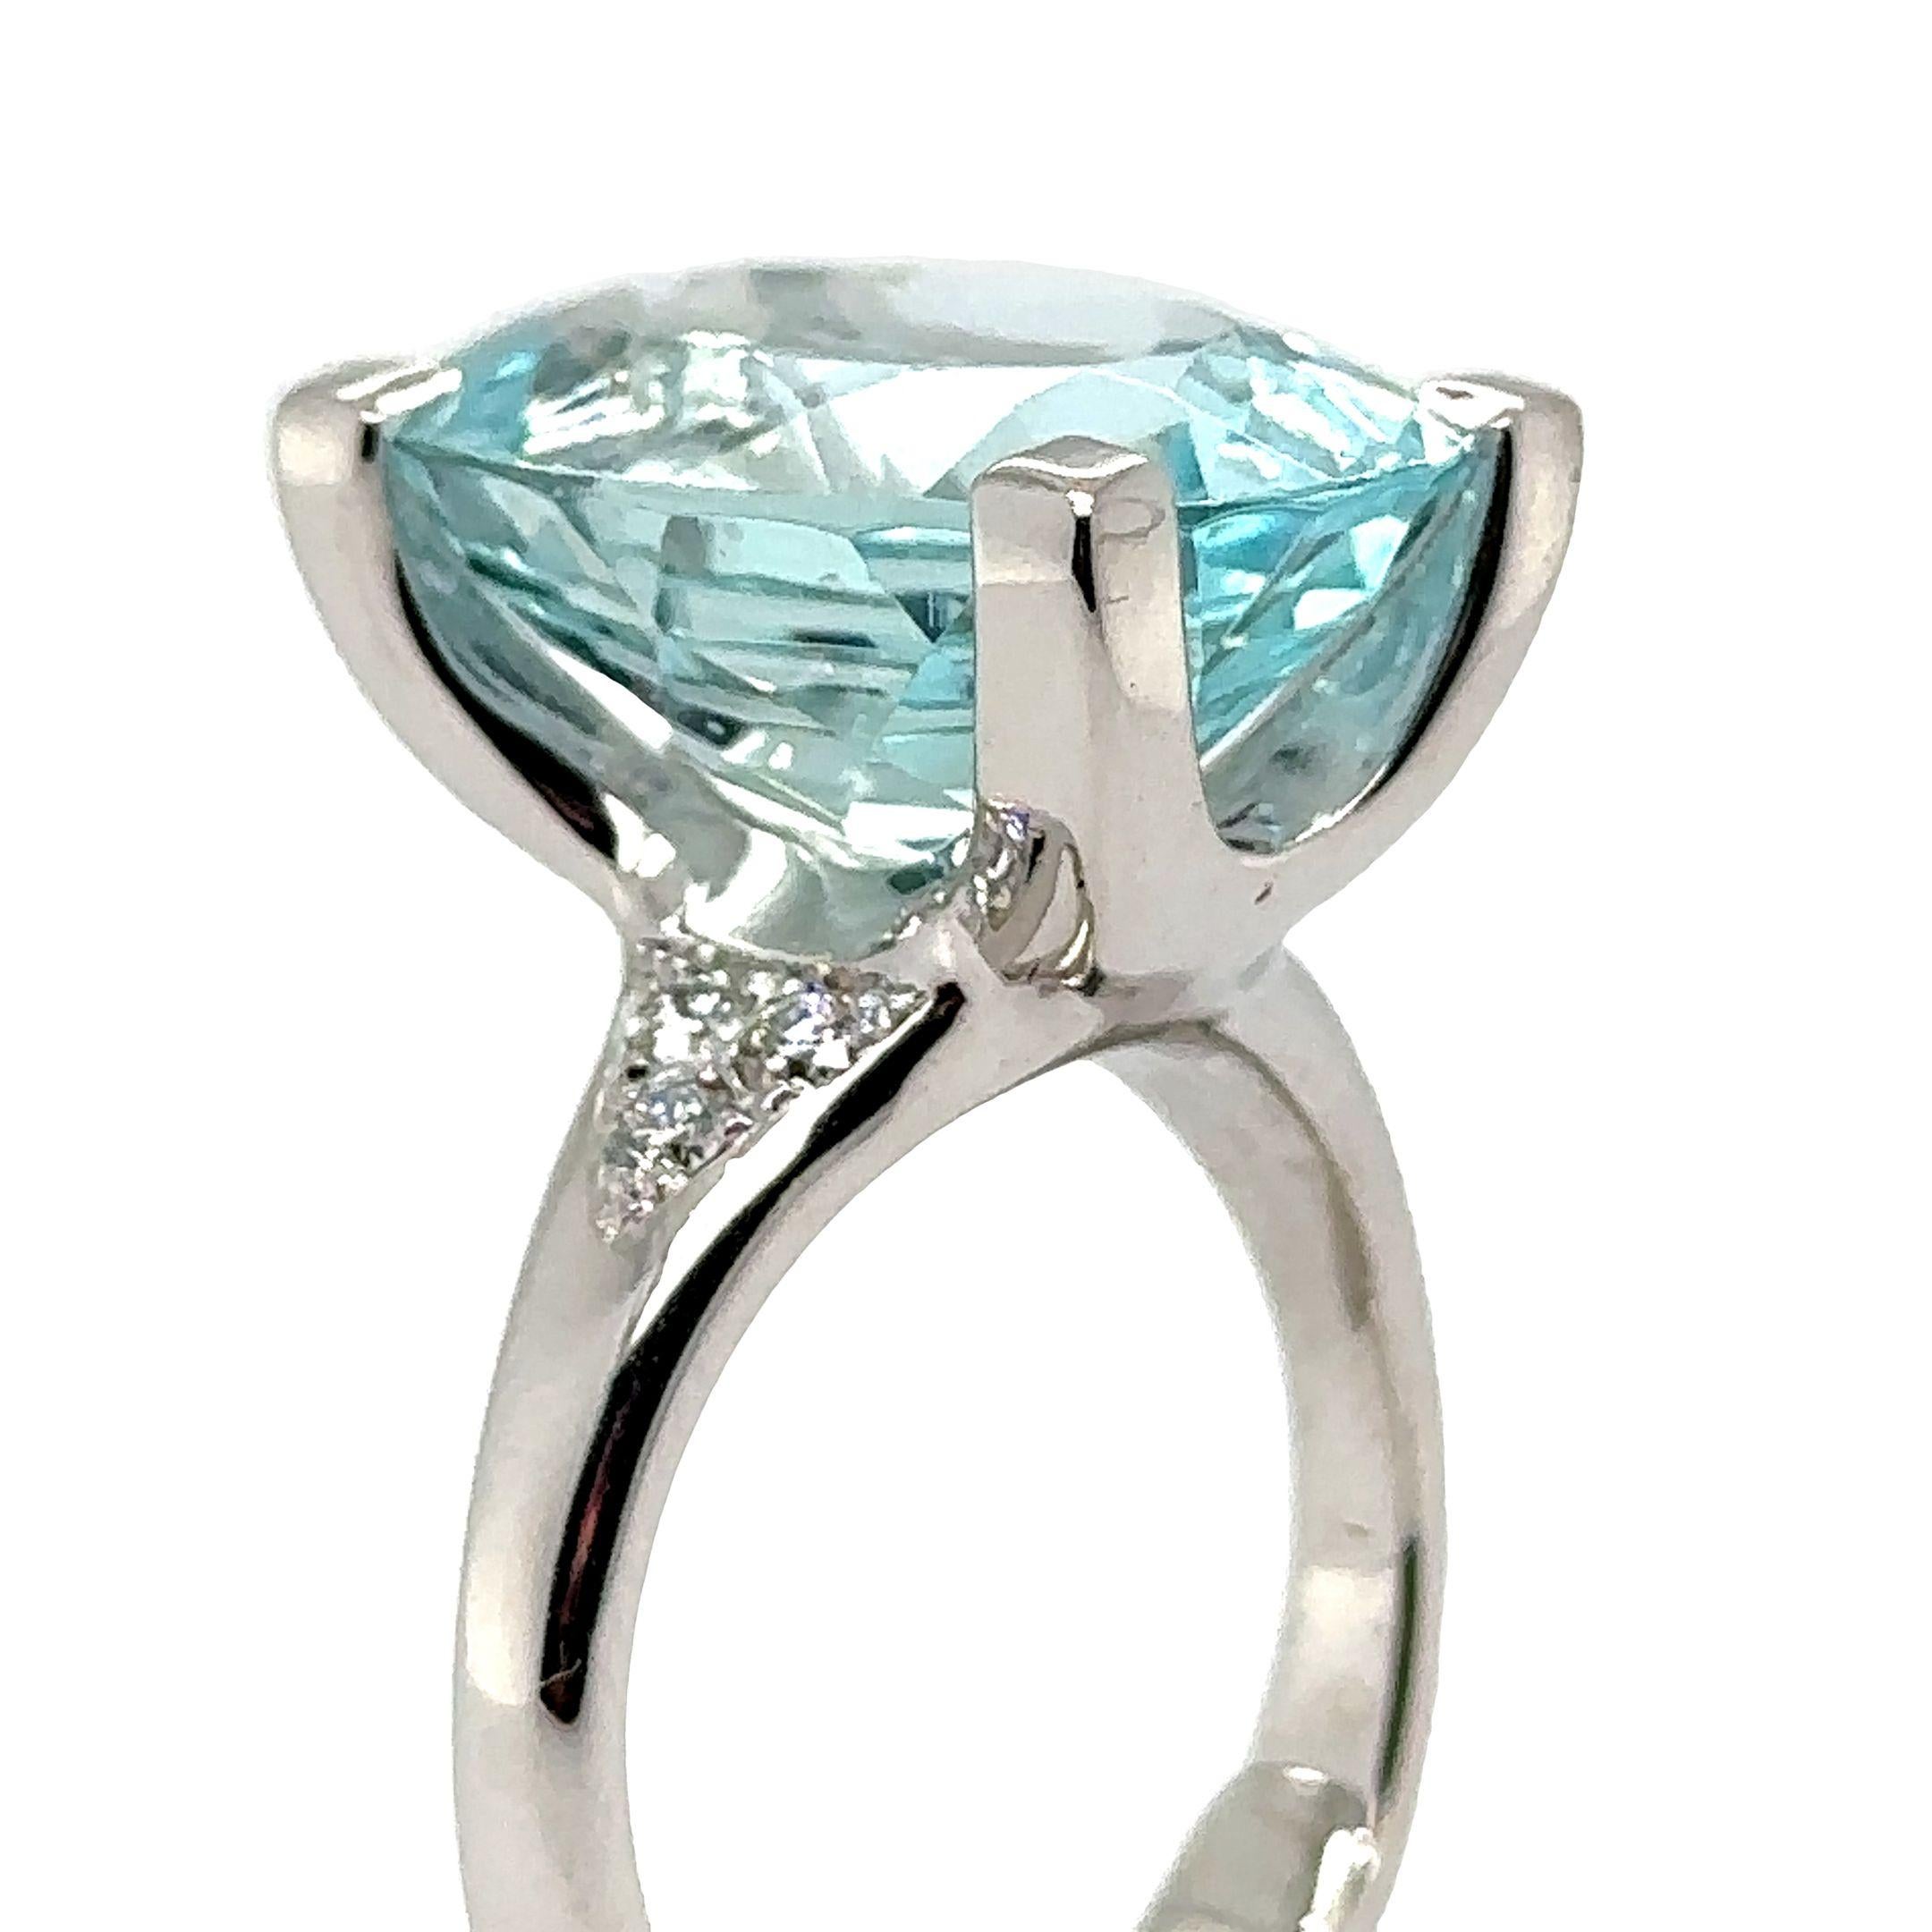 A Cerrone Aquamarine Oval Ring, four claw set in 18ct white gold with 6 diamonds pavé set on the shoulders on a 3.9 to 2.8mm reverse tapered concave band.

Aquamarine 10.92ct, 18.0 x 13.0 x 8.2mm, light blue, very good clarity.

Diamonds 6 = 0.20ct,